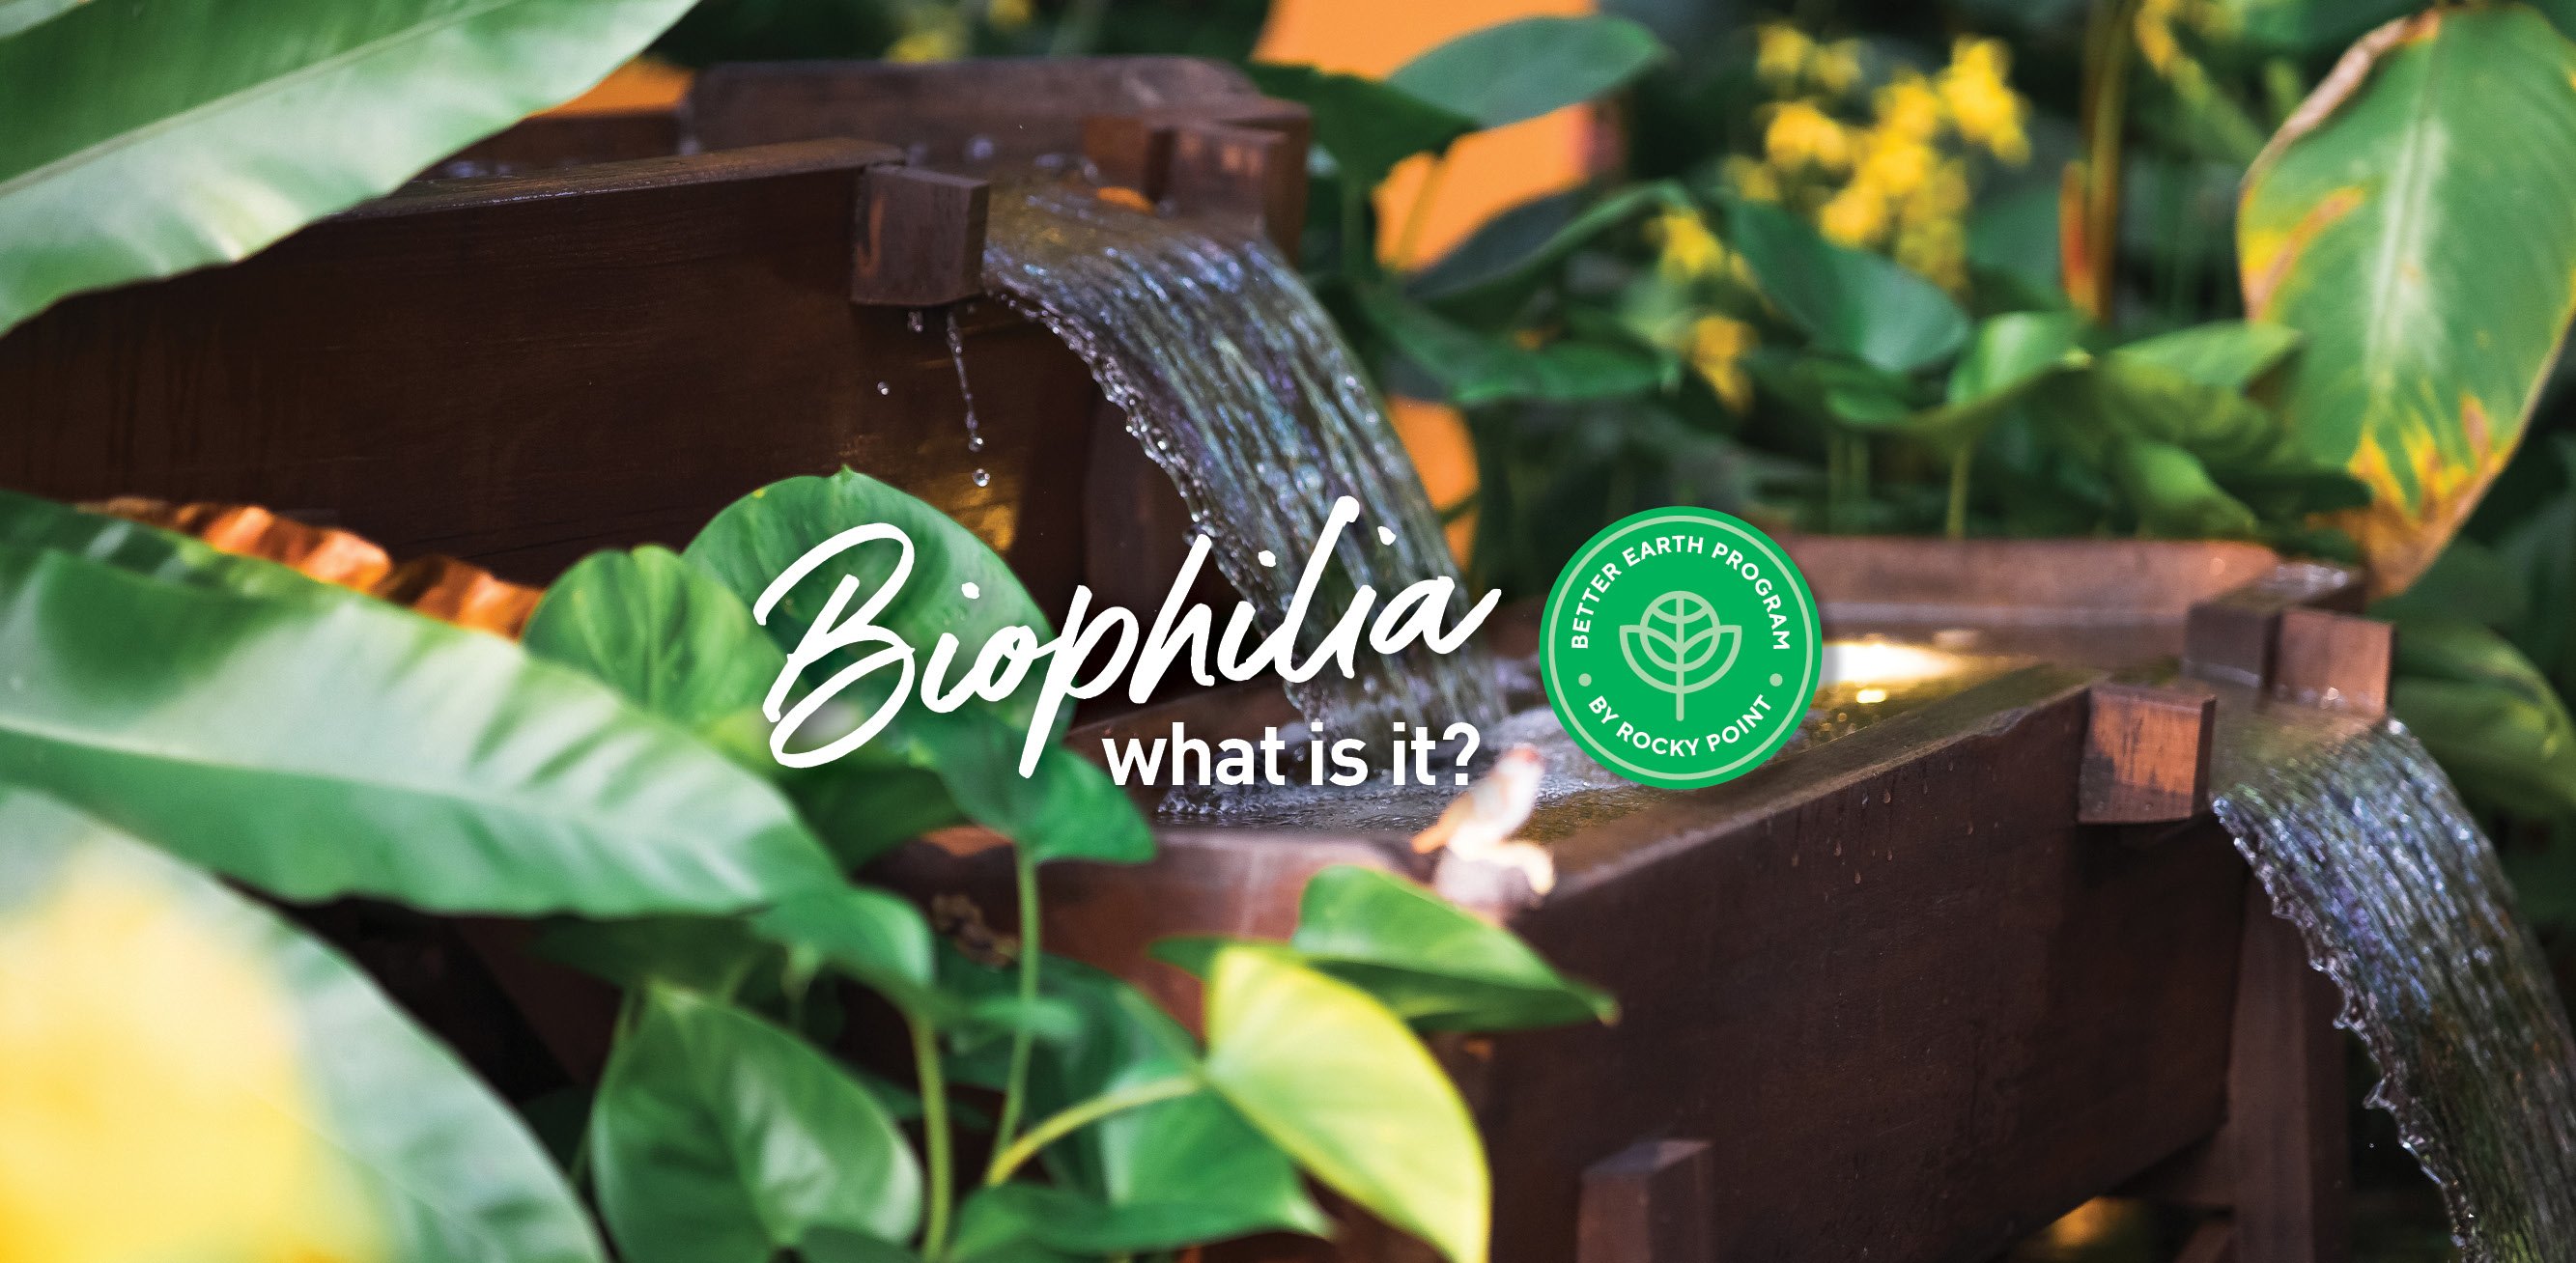 Biophilia - what is it?